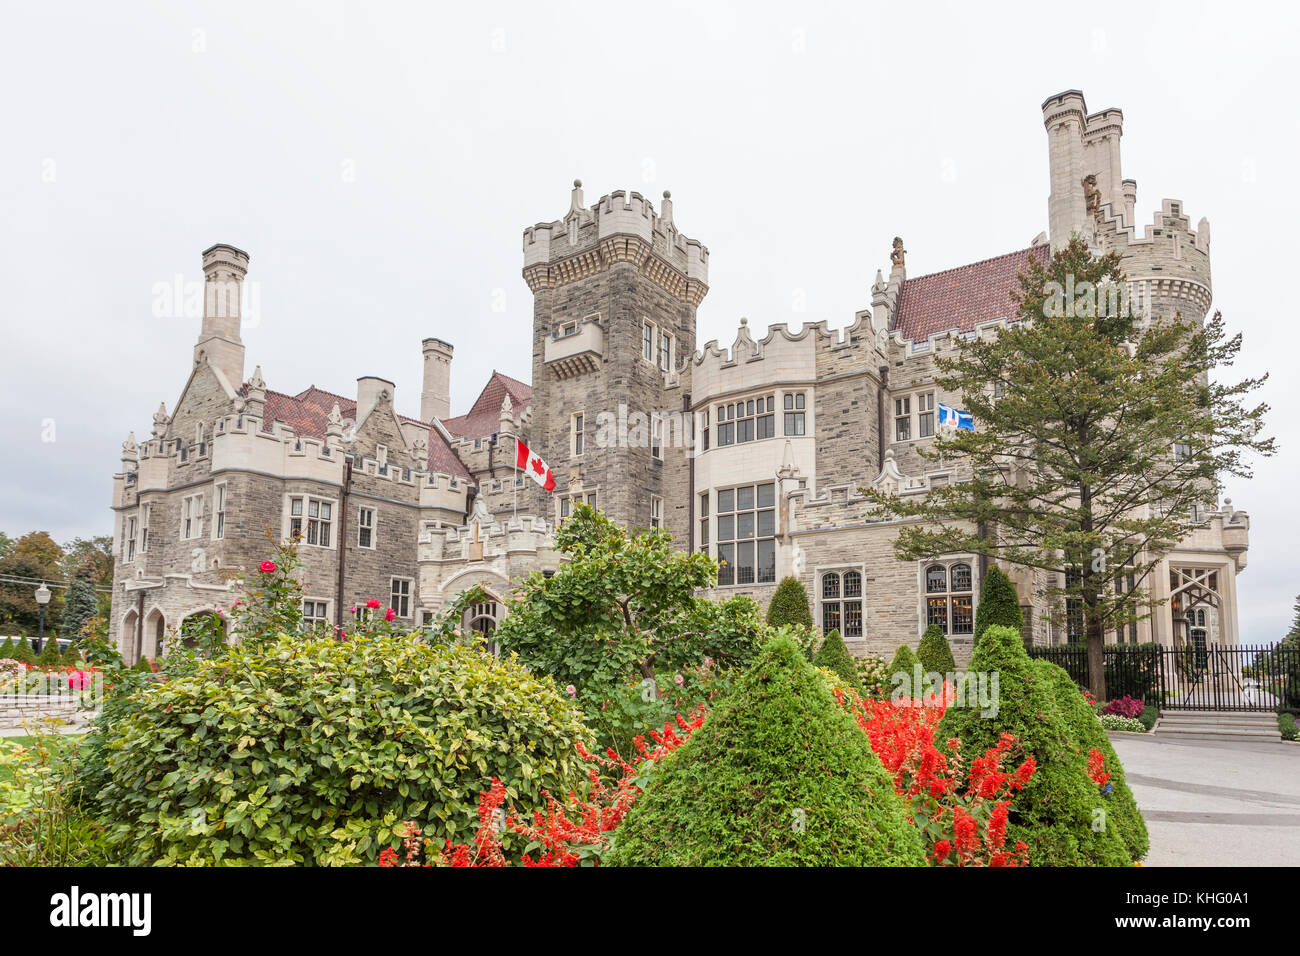 Toronto, Canada - Oct 12, 2017: Exterior view of the Casa Loma - a gothic style house and museum in Toronto. Province of Ontario, Canada Stock Photo